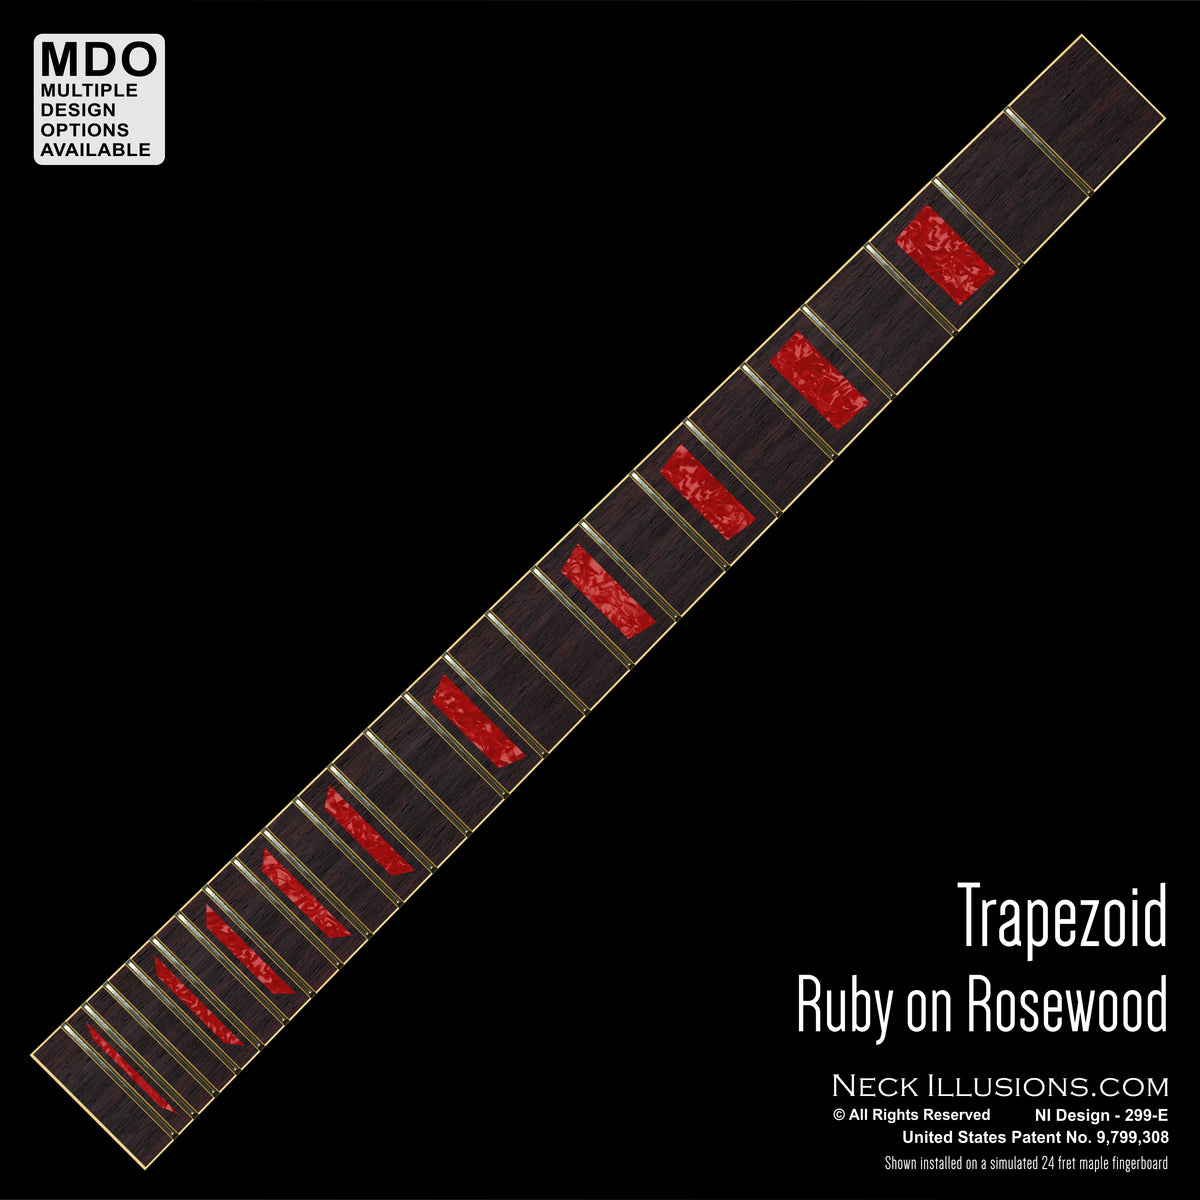 Trapezoid on Rosewood